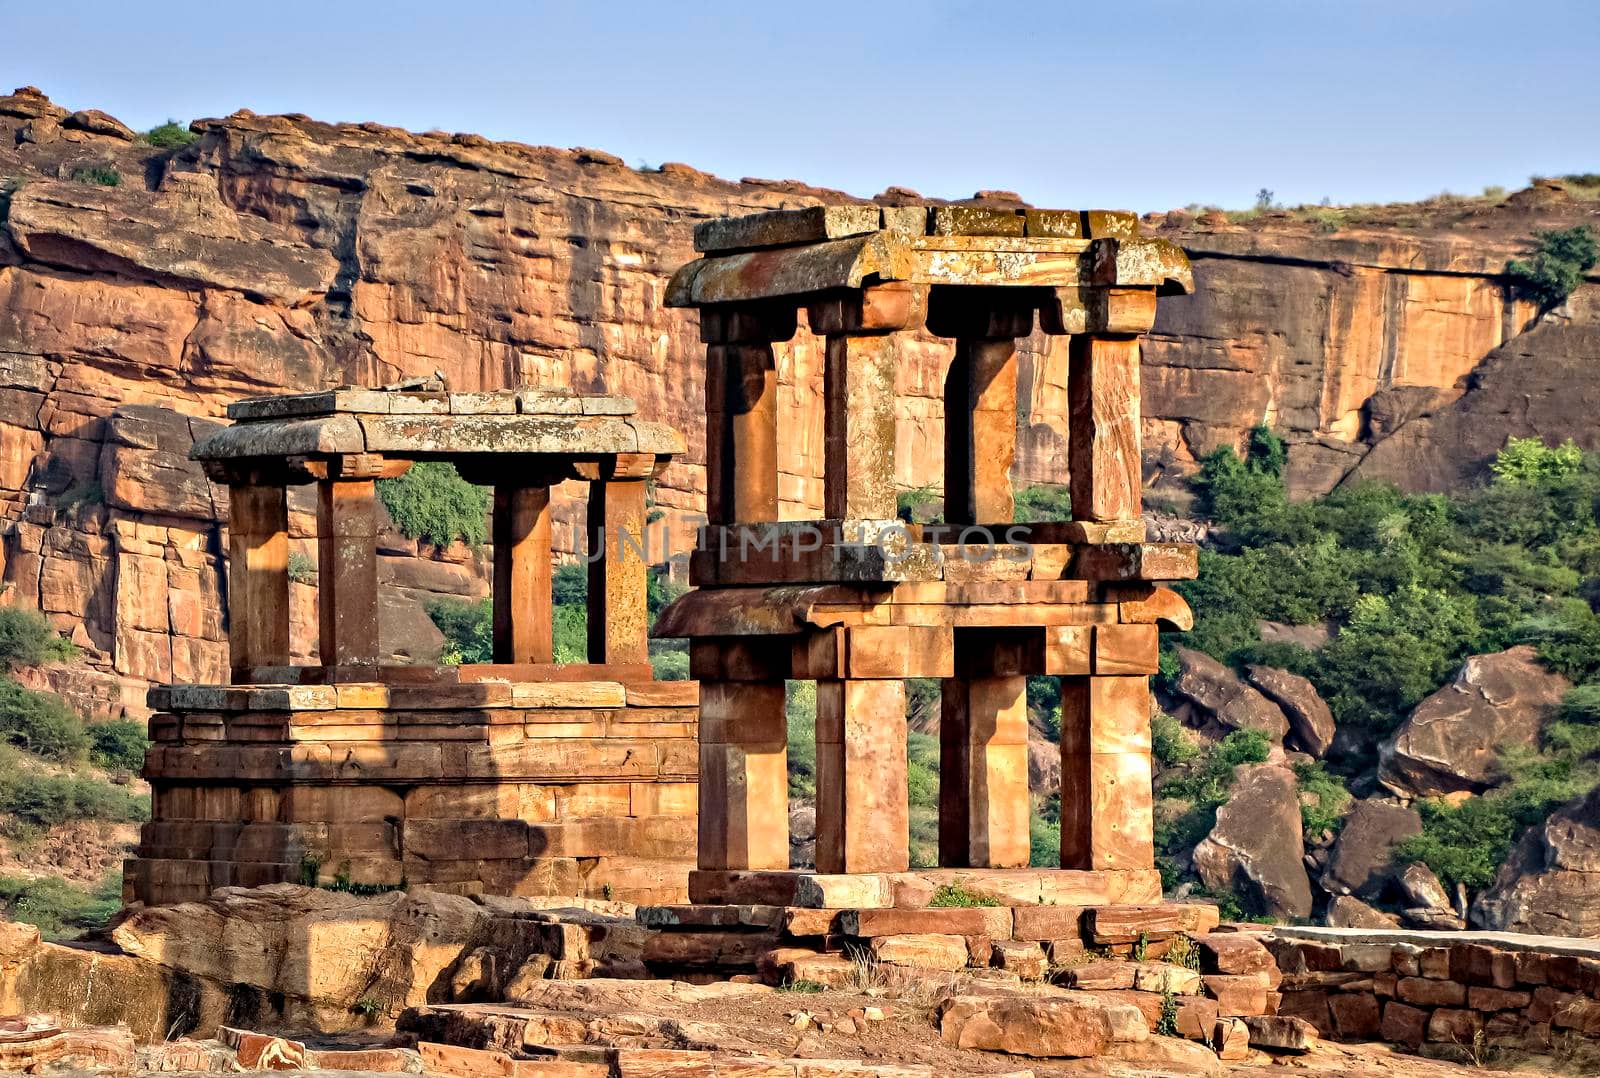 Ancient , two storied observation tower made up of huge stones in Badami fort, Karnataka, India.